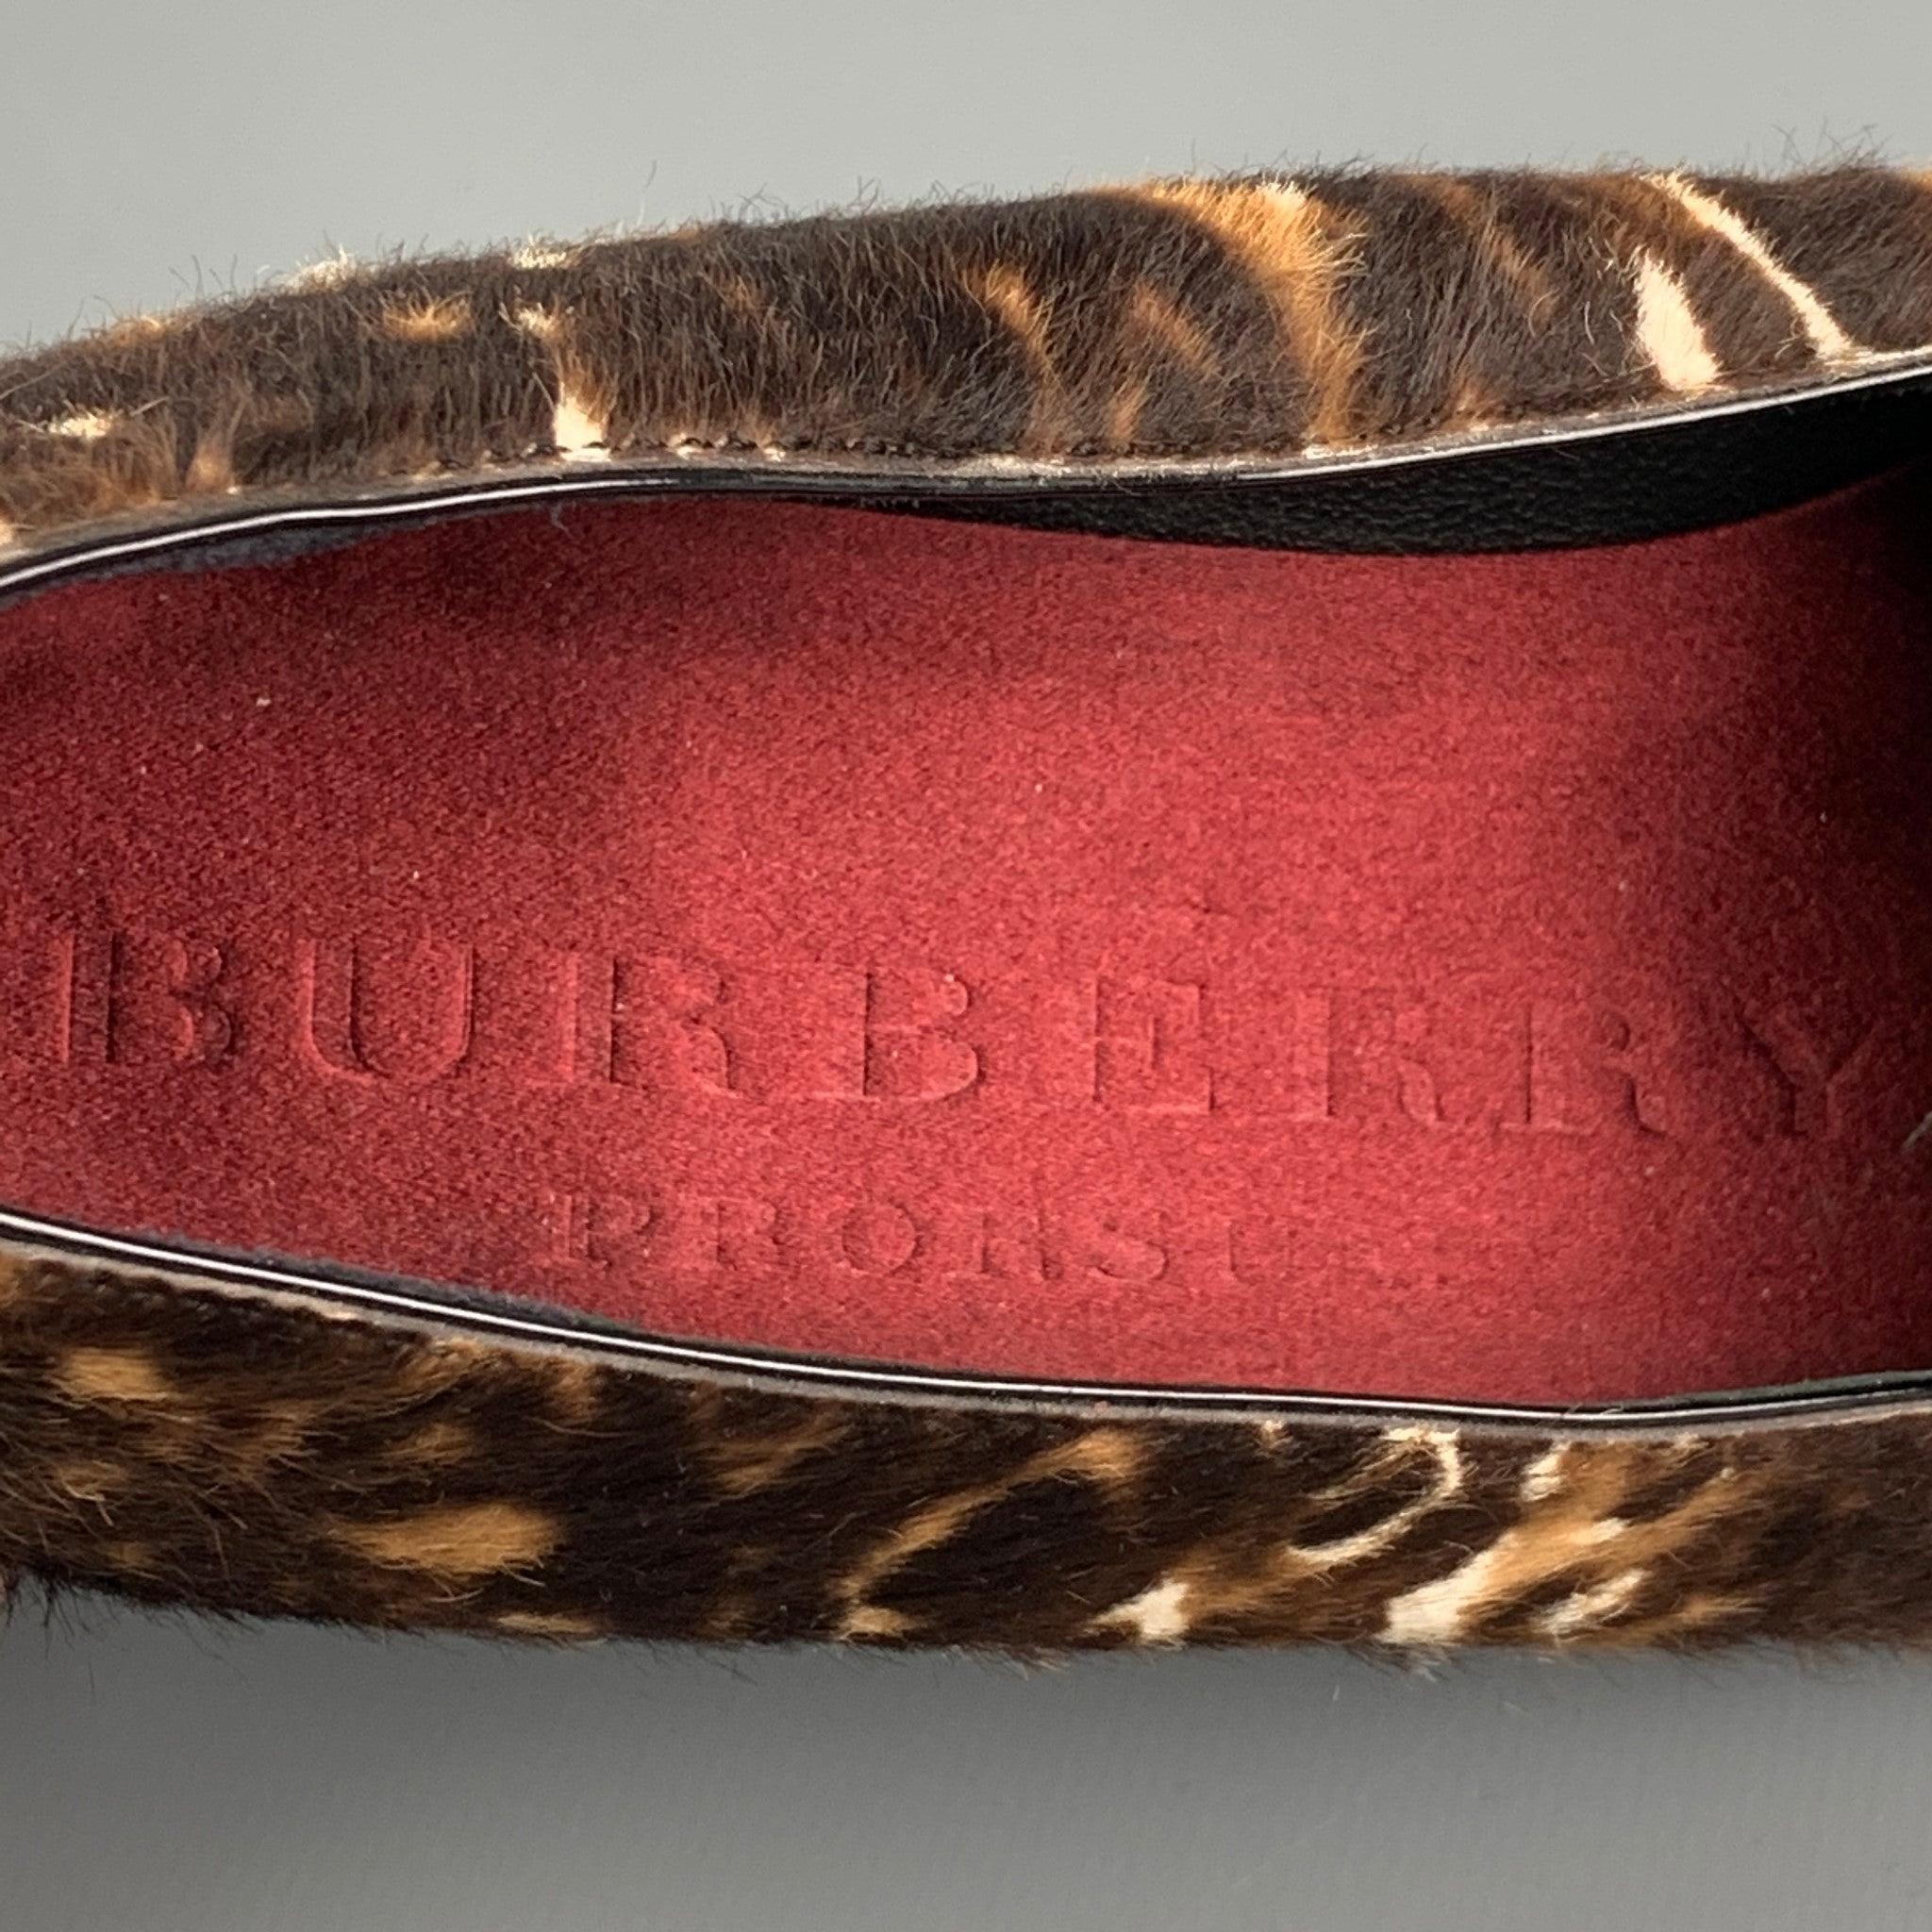 BURBERRY PRORSUM Size 5 Brown Leather Animal Print Pony Hair Slip On Flats For Sale 3